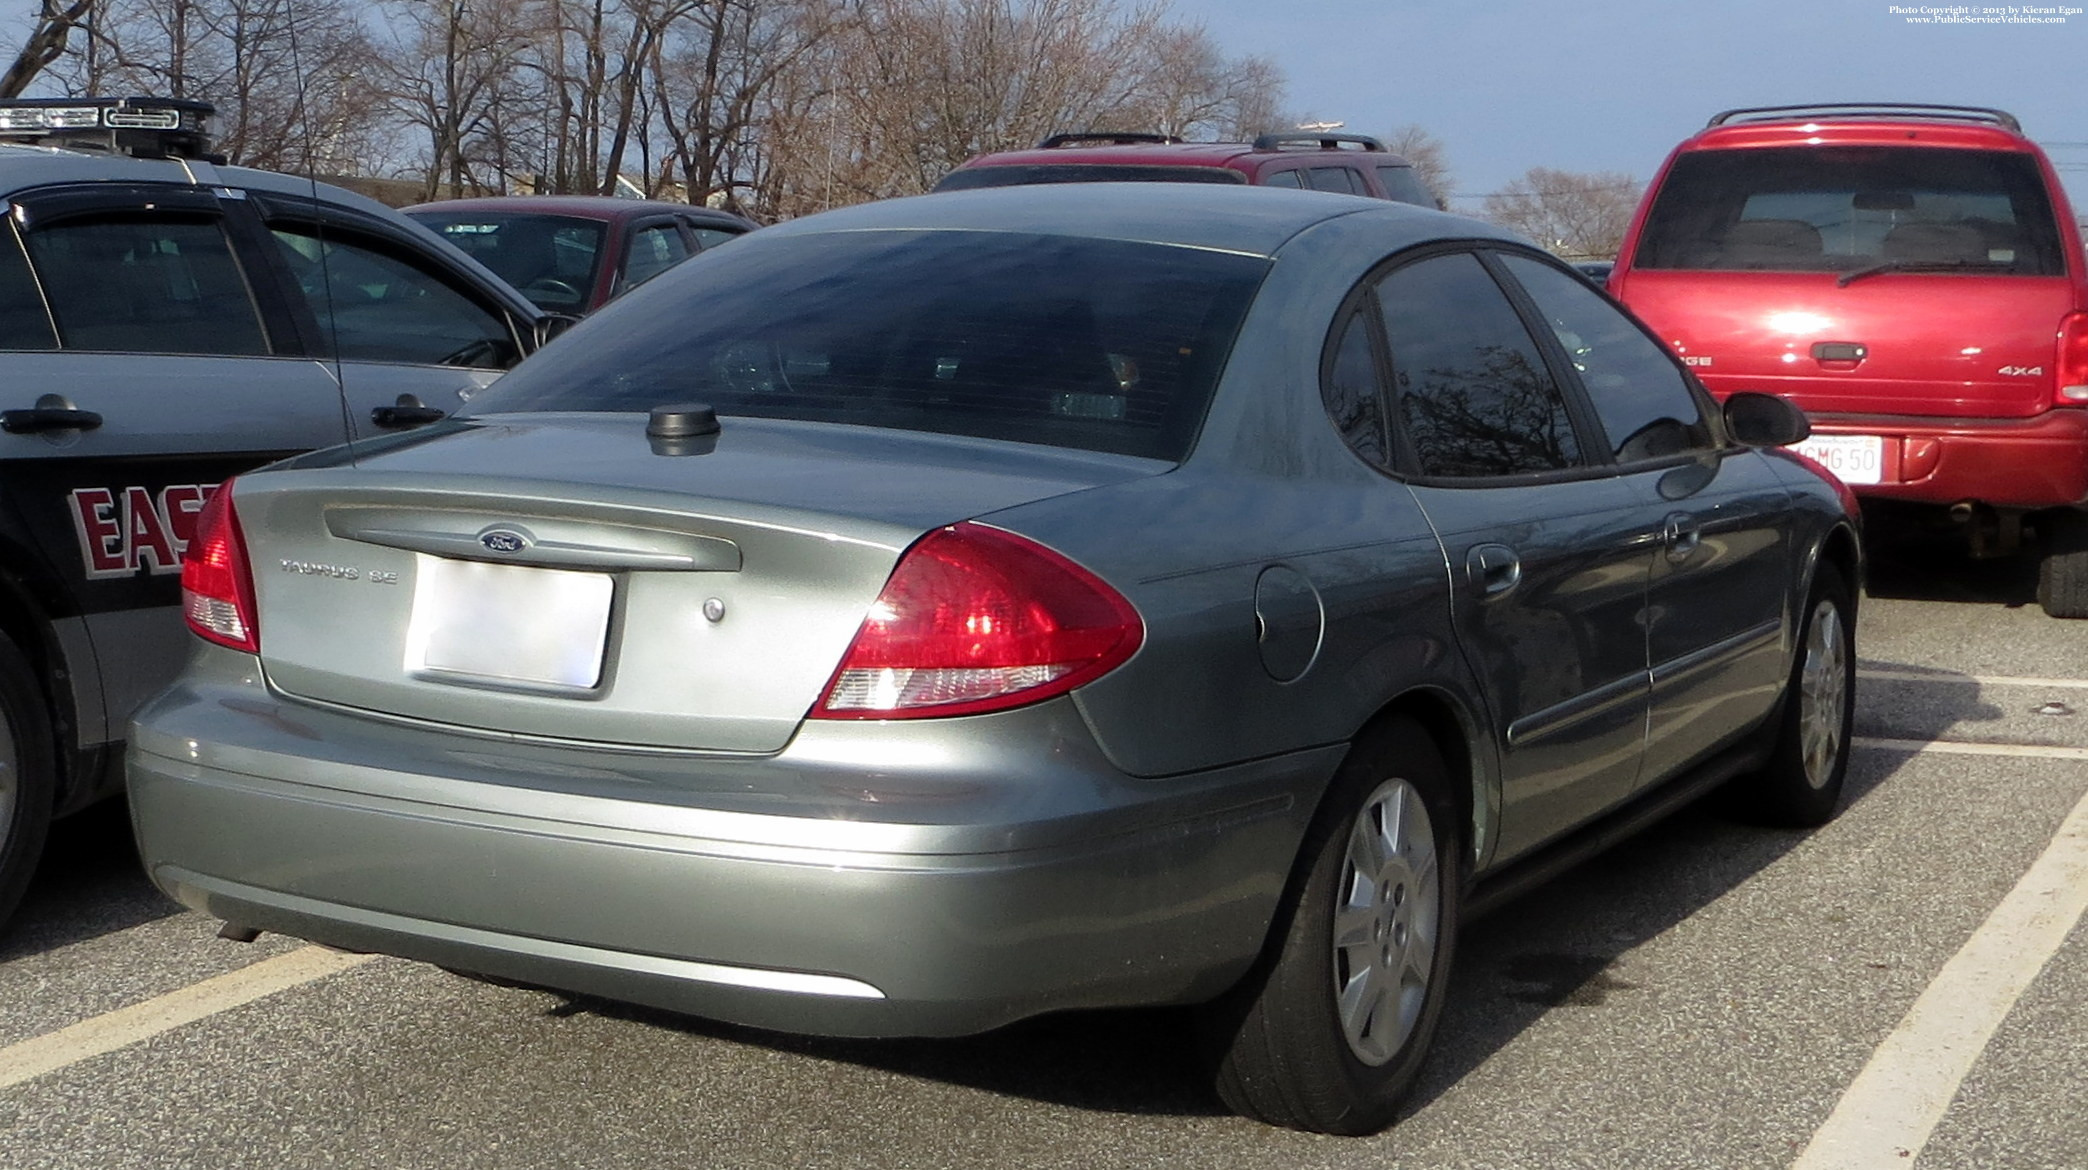 A photo  of East Providence Police
            Unmarked Unit, a 2000-2006 Ford Taurus             taken by Kieran Egan